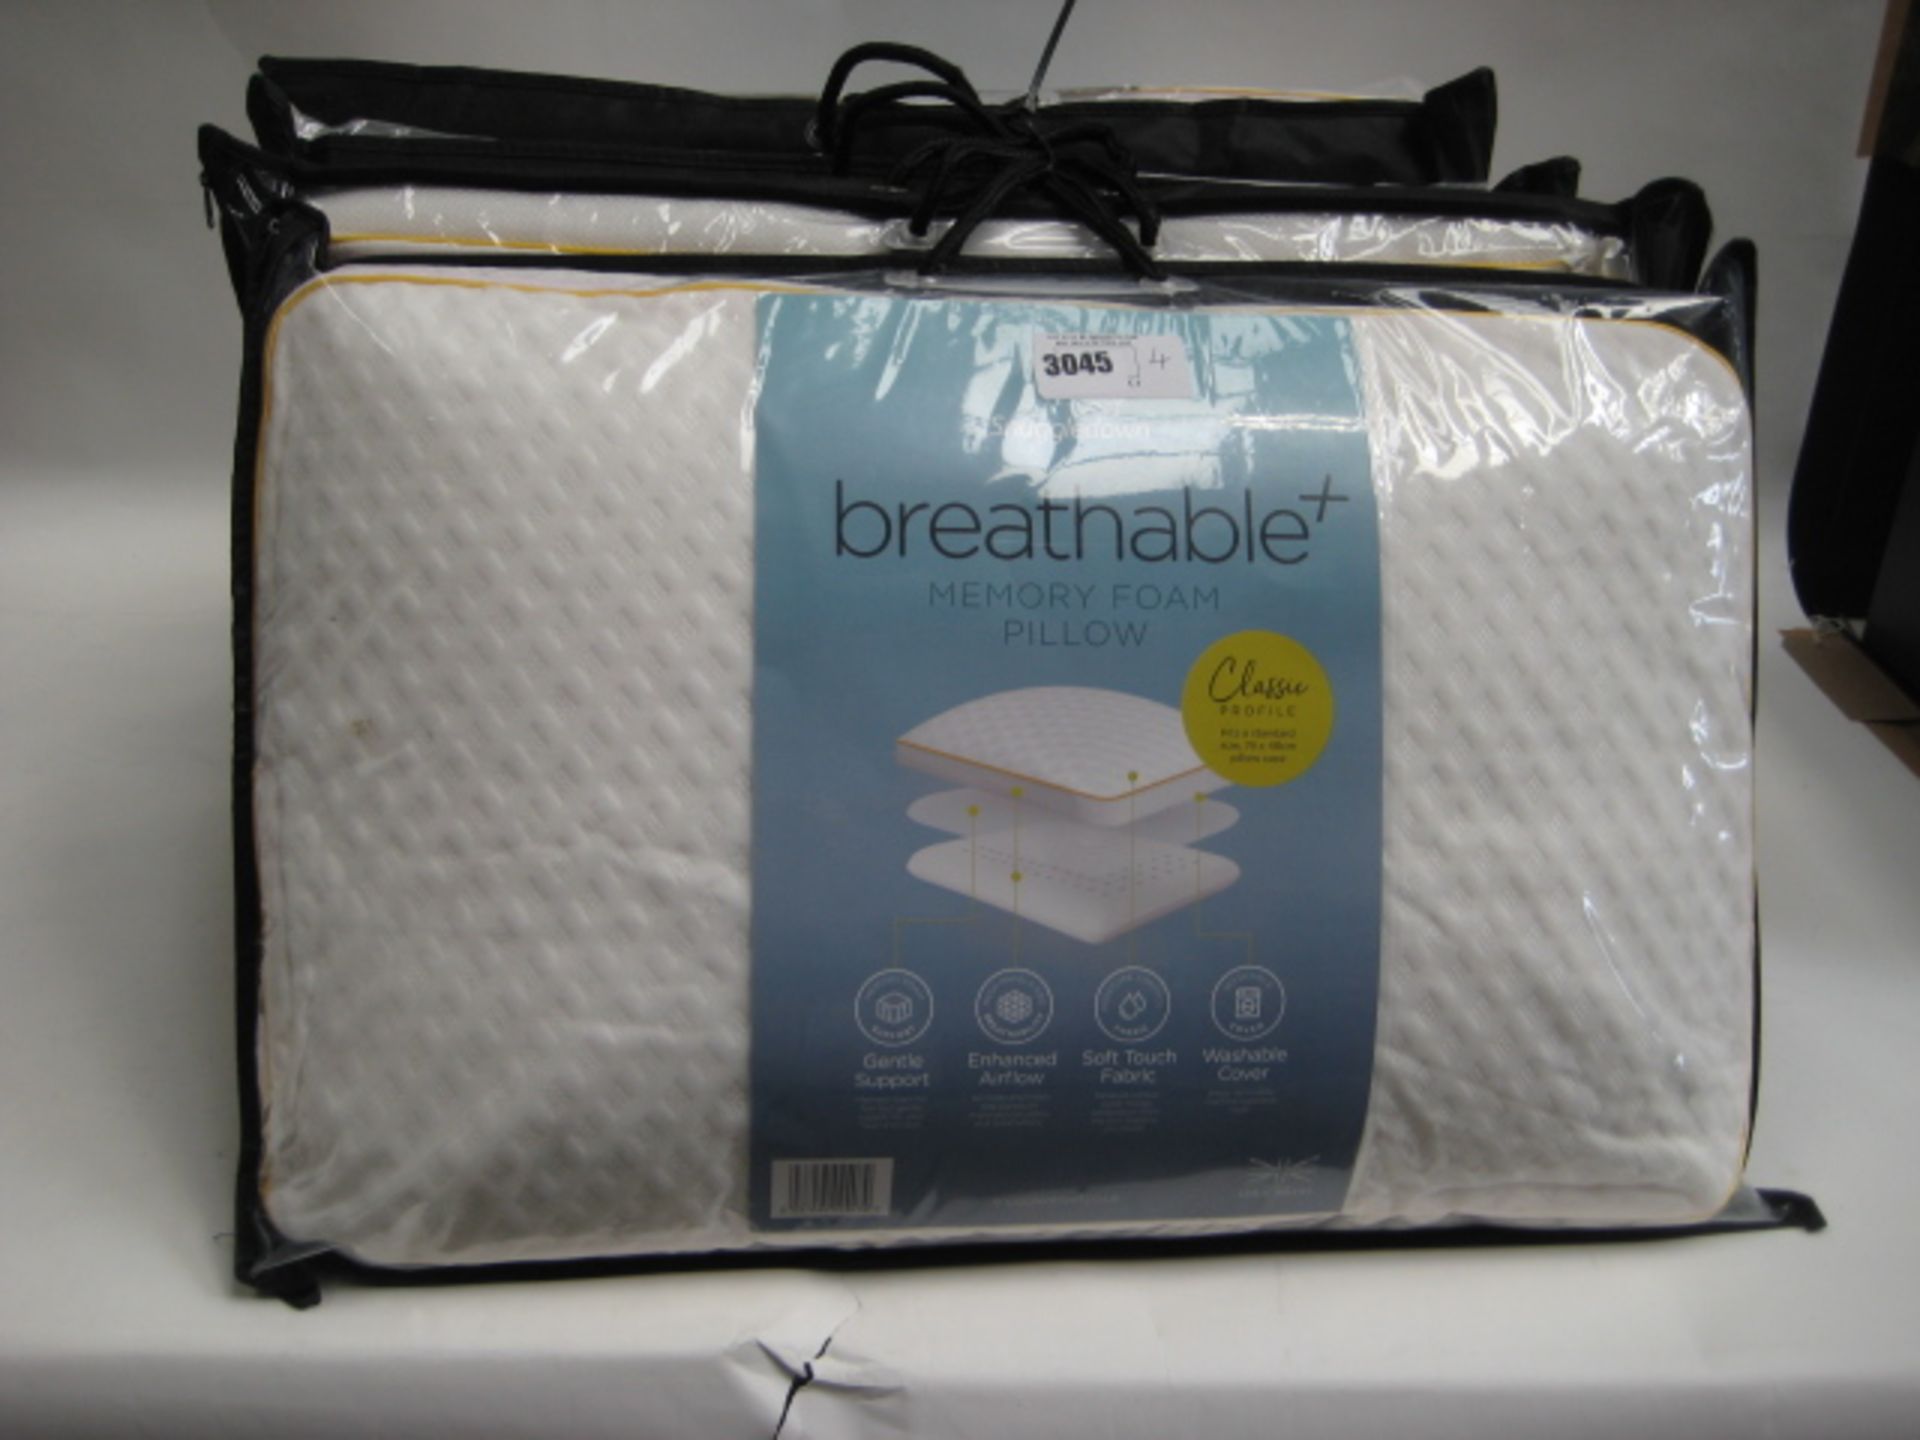 Four bagged Snuggle Down breathable memory foam pillows